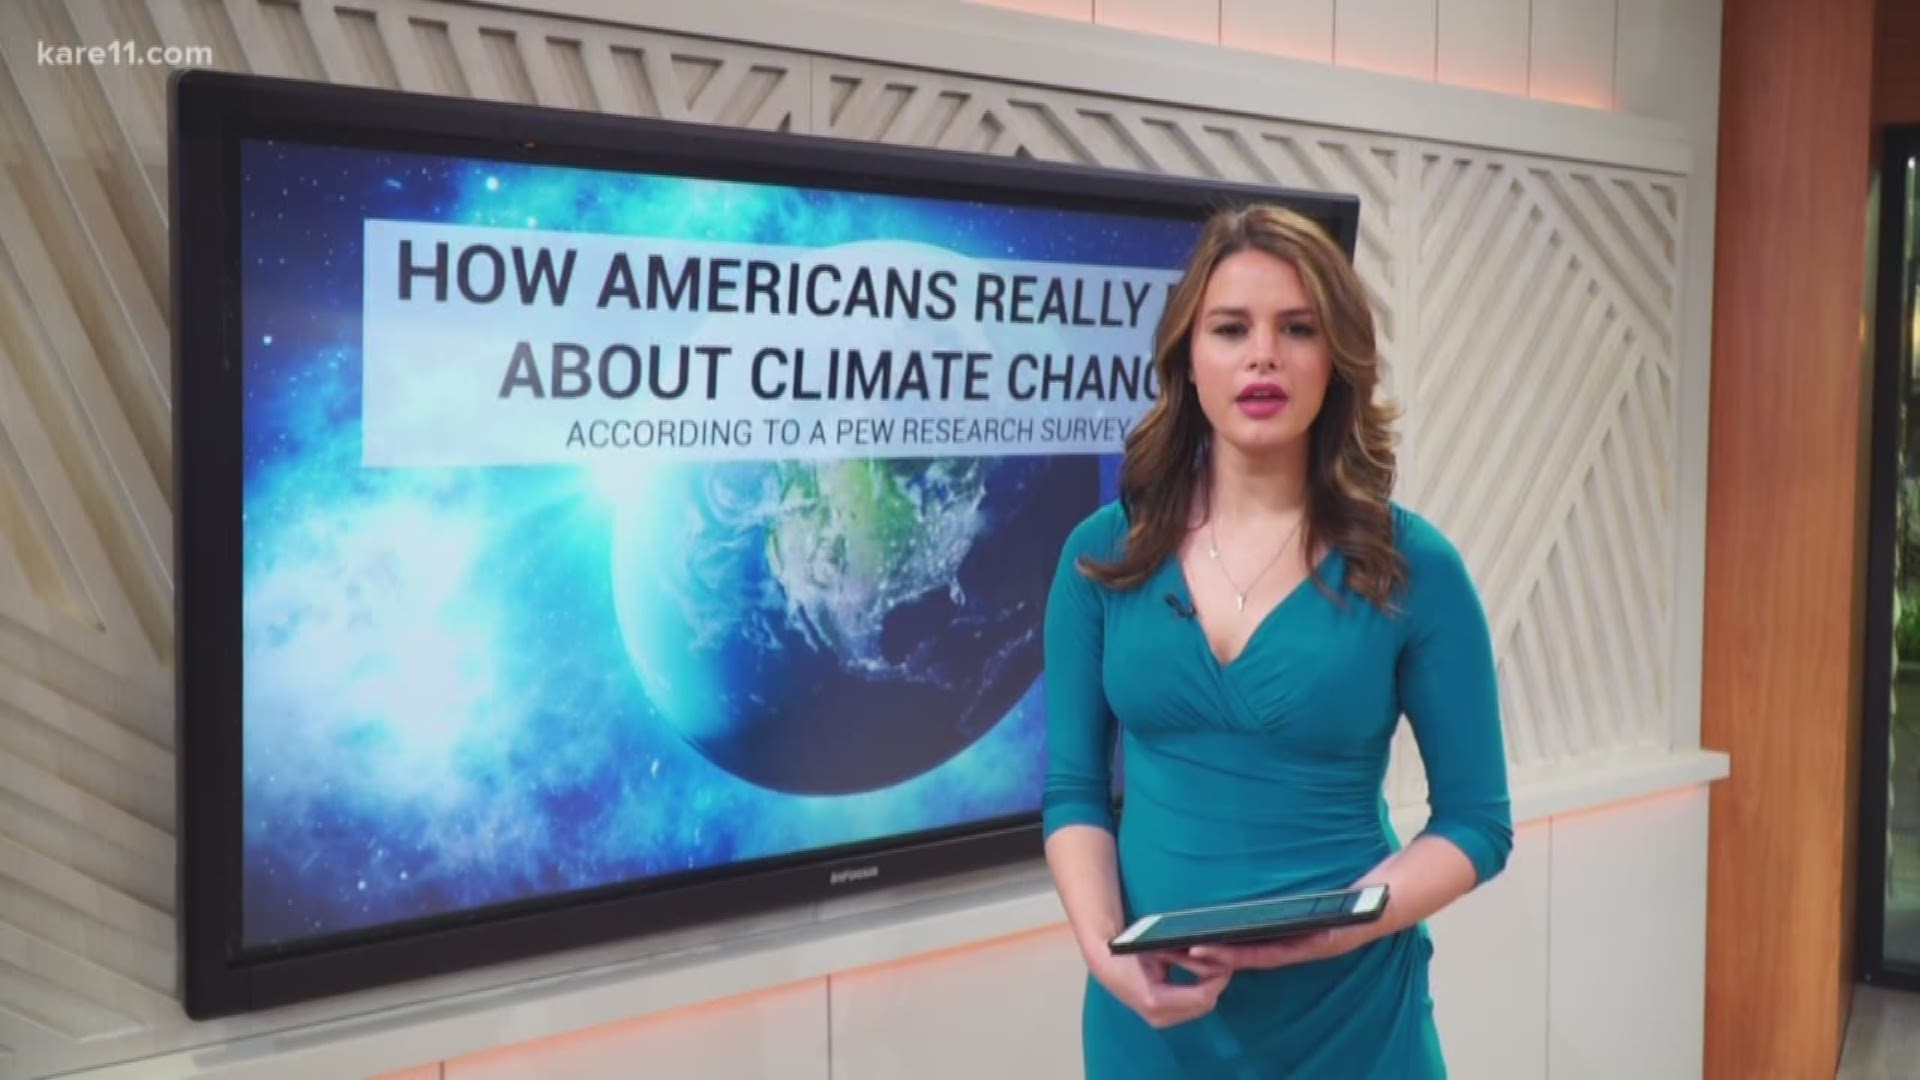 Recent polling finds most people believe global warming is happening and humans are responsible, but less than half are greatly worried about it. https://kare11.tv/2W1M5eO